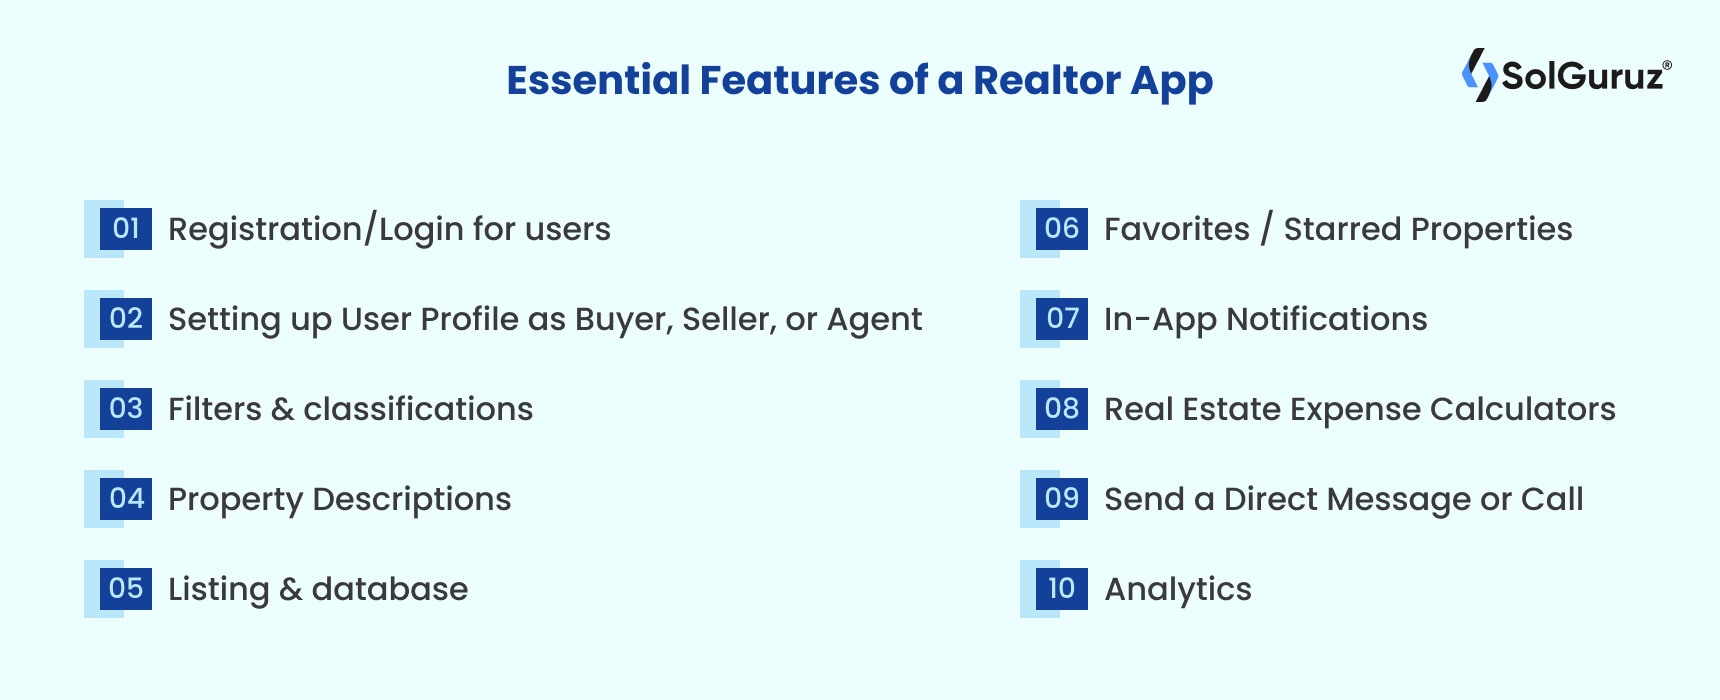 Essential features of a realtor app